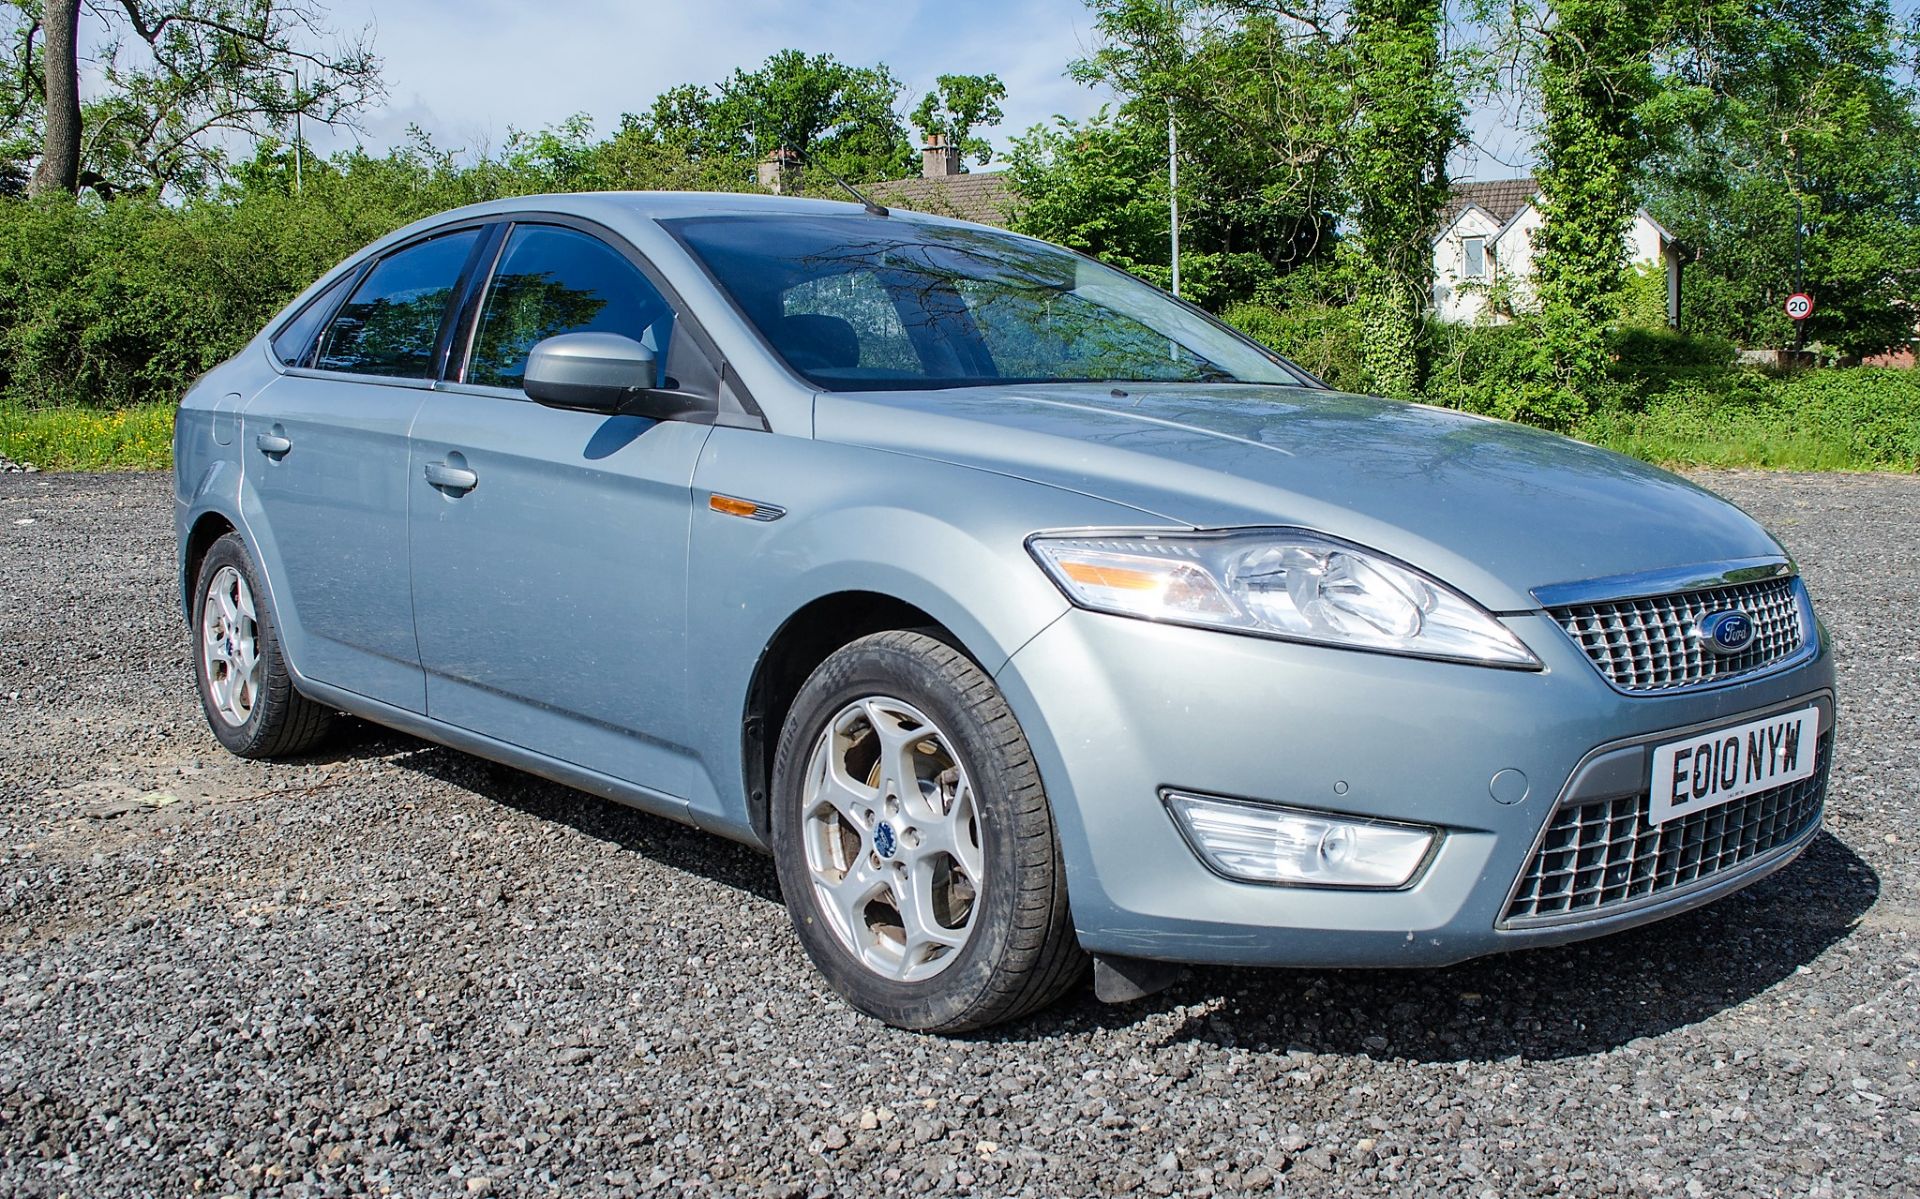 Ford Mondeo 2.0 TDCi Titanium 5 door saloon car Registration Number: EO10 NYW Date of - Image 2 of 29